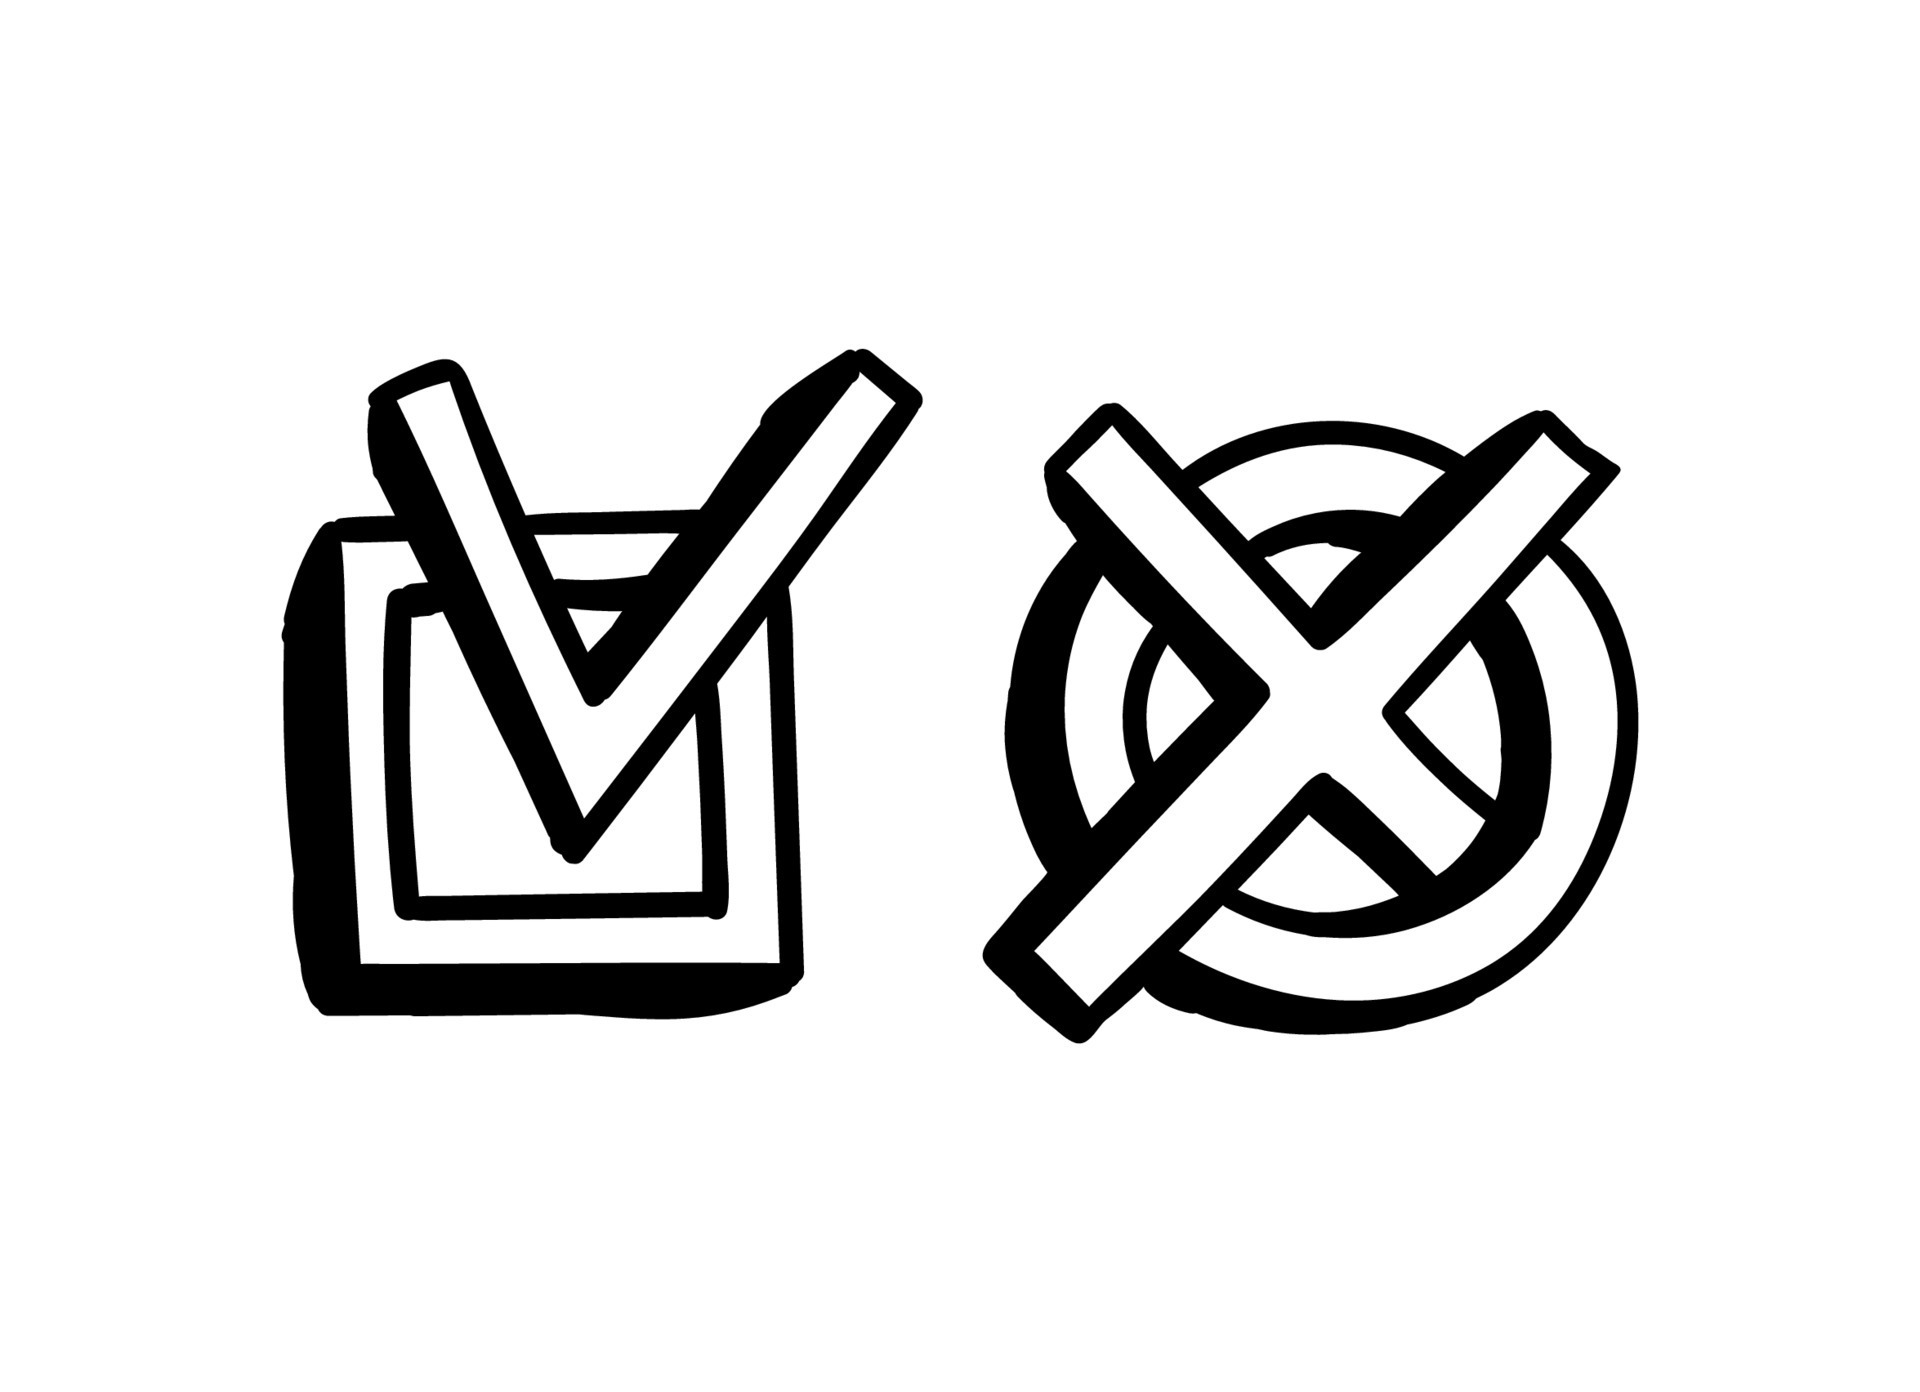 Premium Vector  Check and cross mark set hand drawn doodle sketch style  vote yes no drawn concept check box cross mark with box circle element  vector illustration